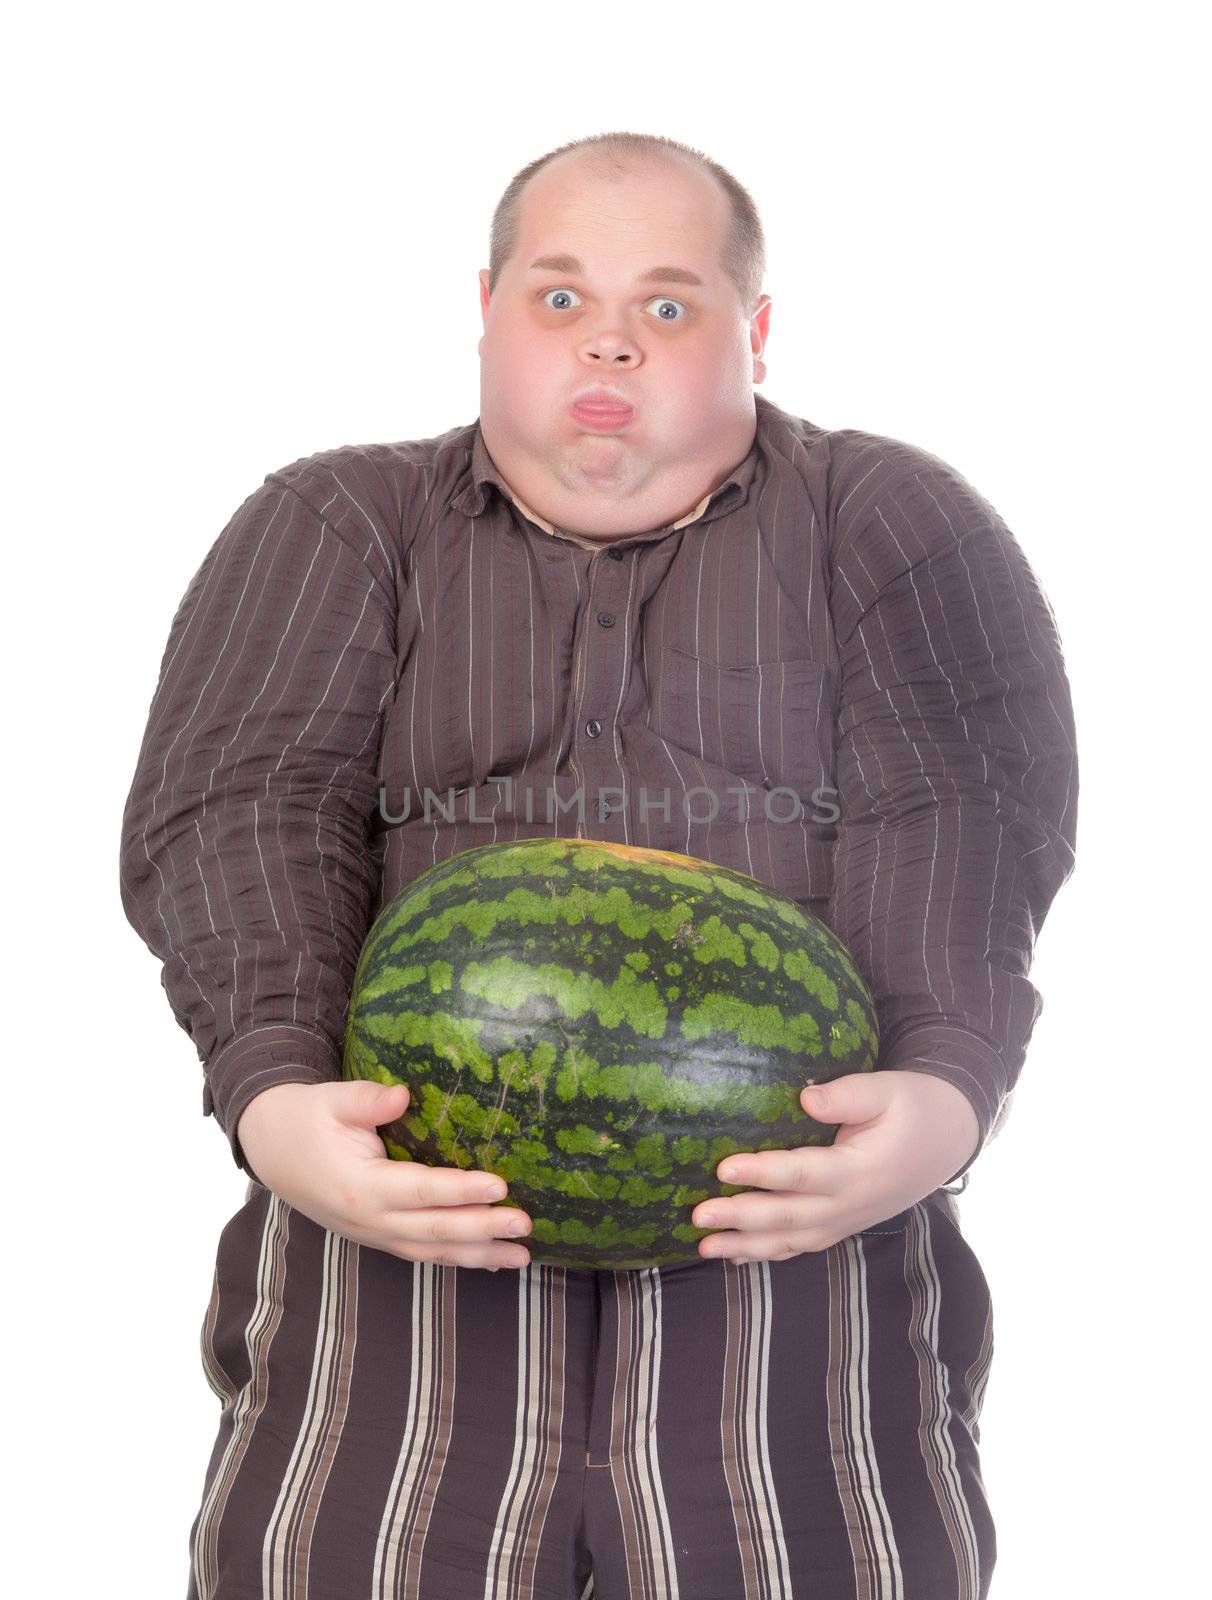 Fat man struggling to hold the weight of a whole watermelon by Discovod